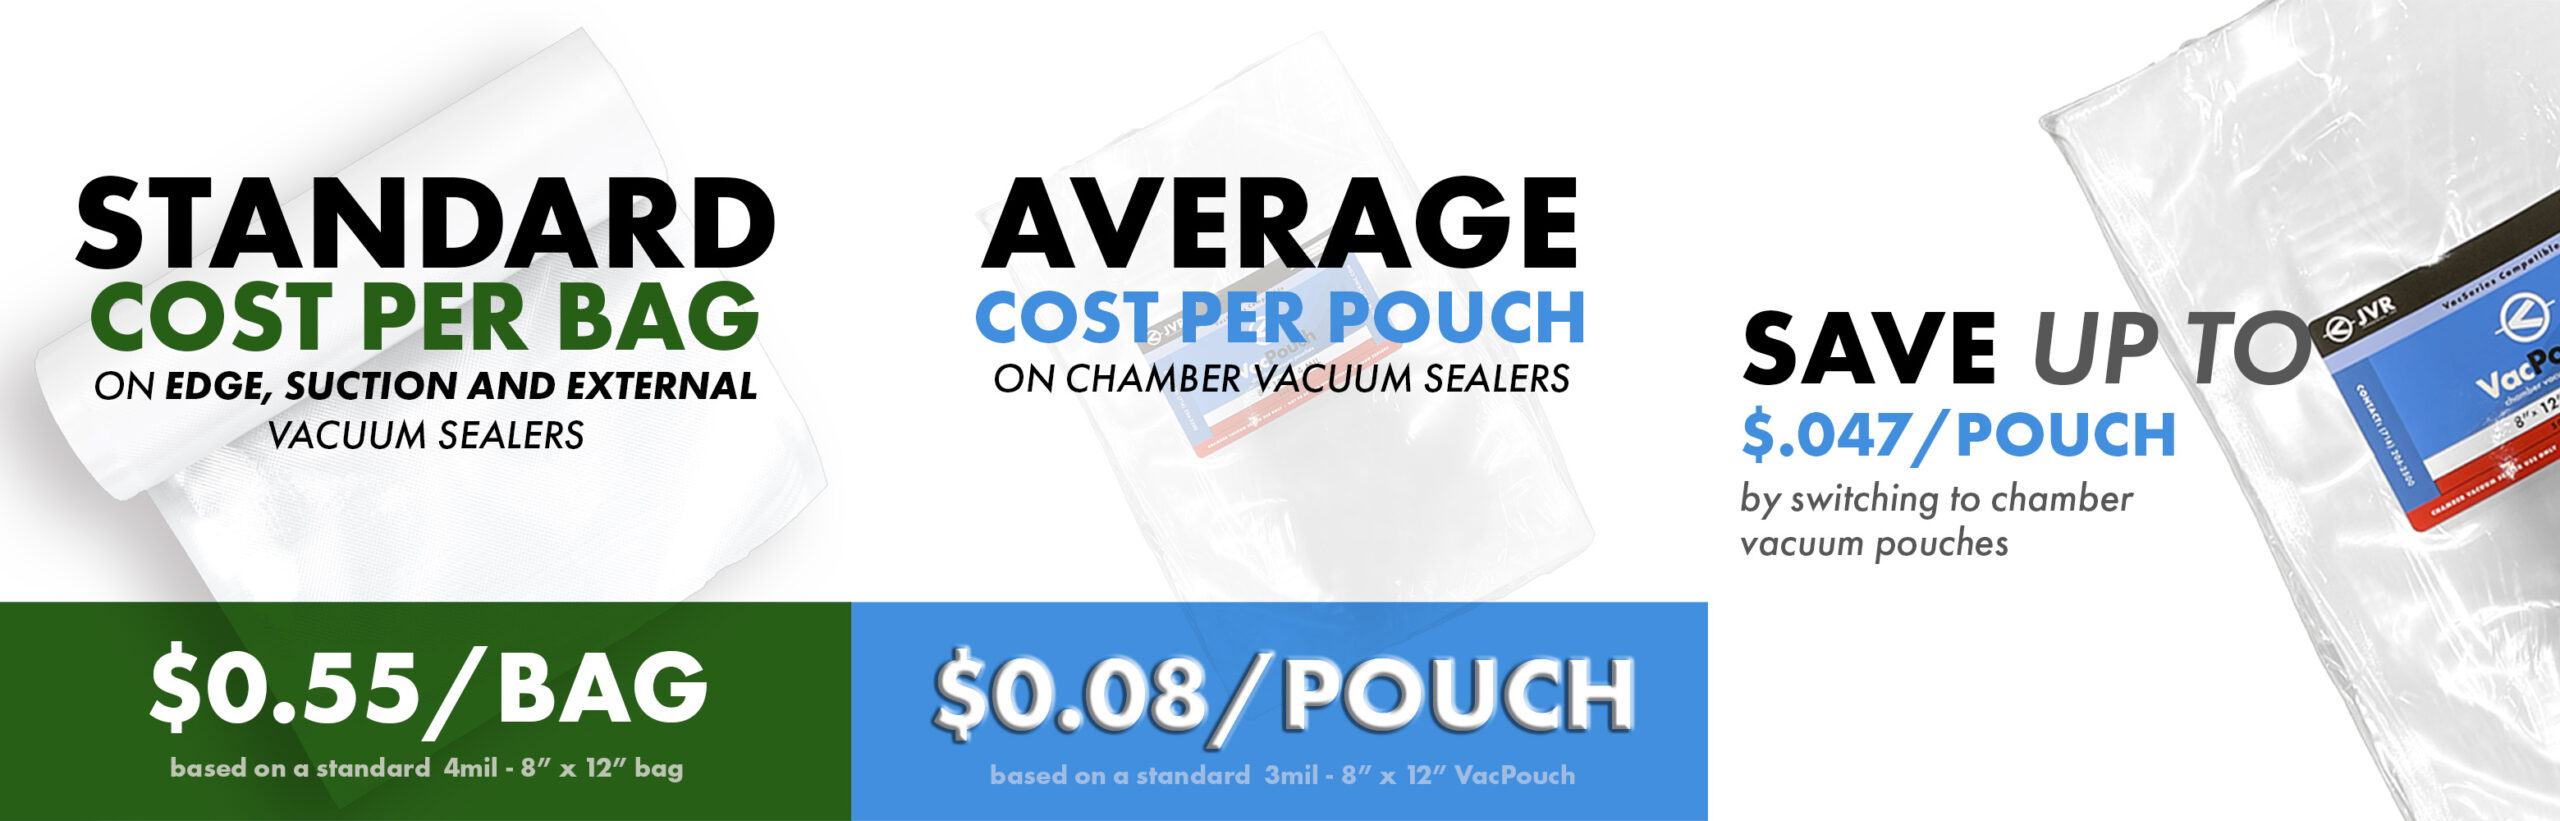 https://jvrinc.com/wp-content/uploads/2023/05/SAVINGS-ON-POUCHES-copy-1-scaled.jpg